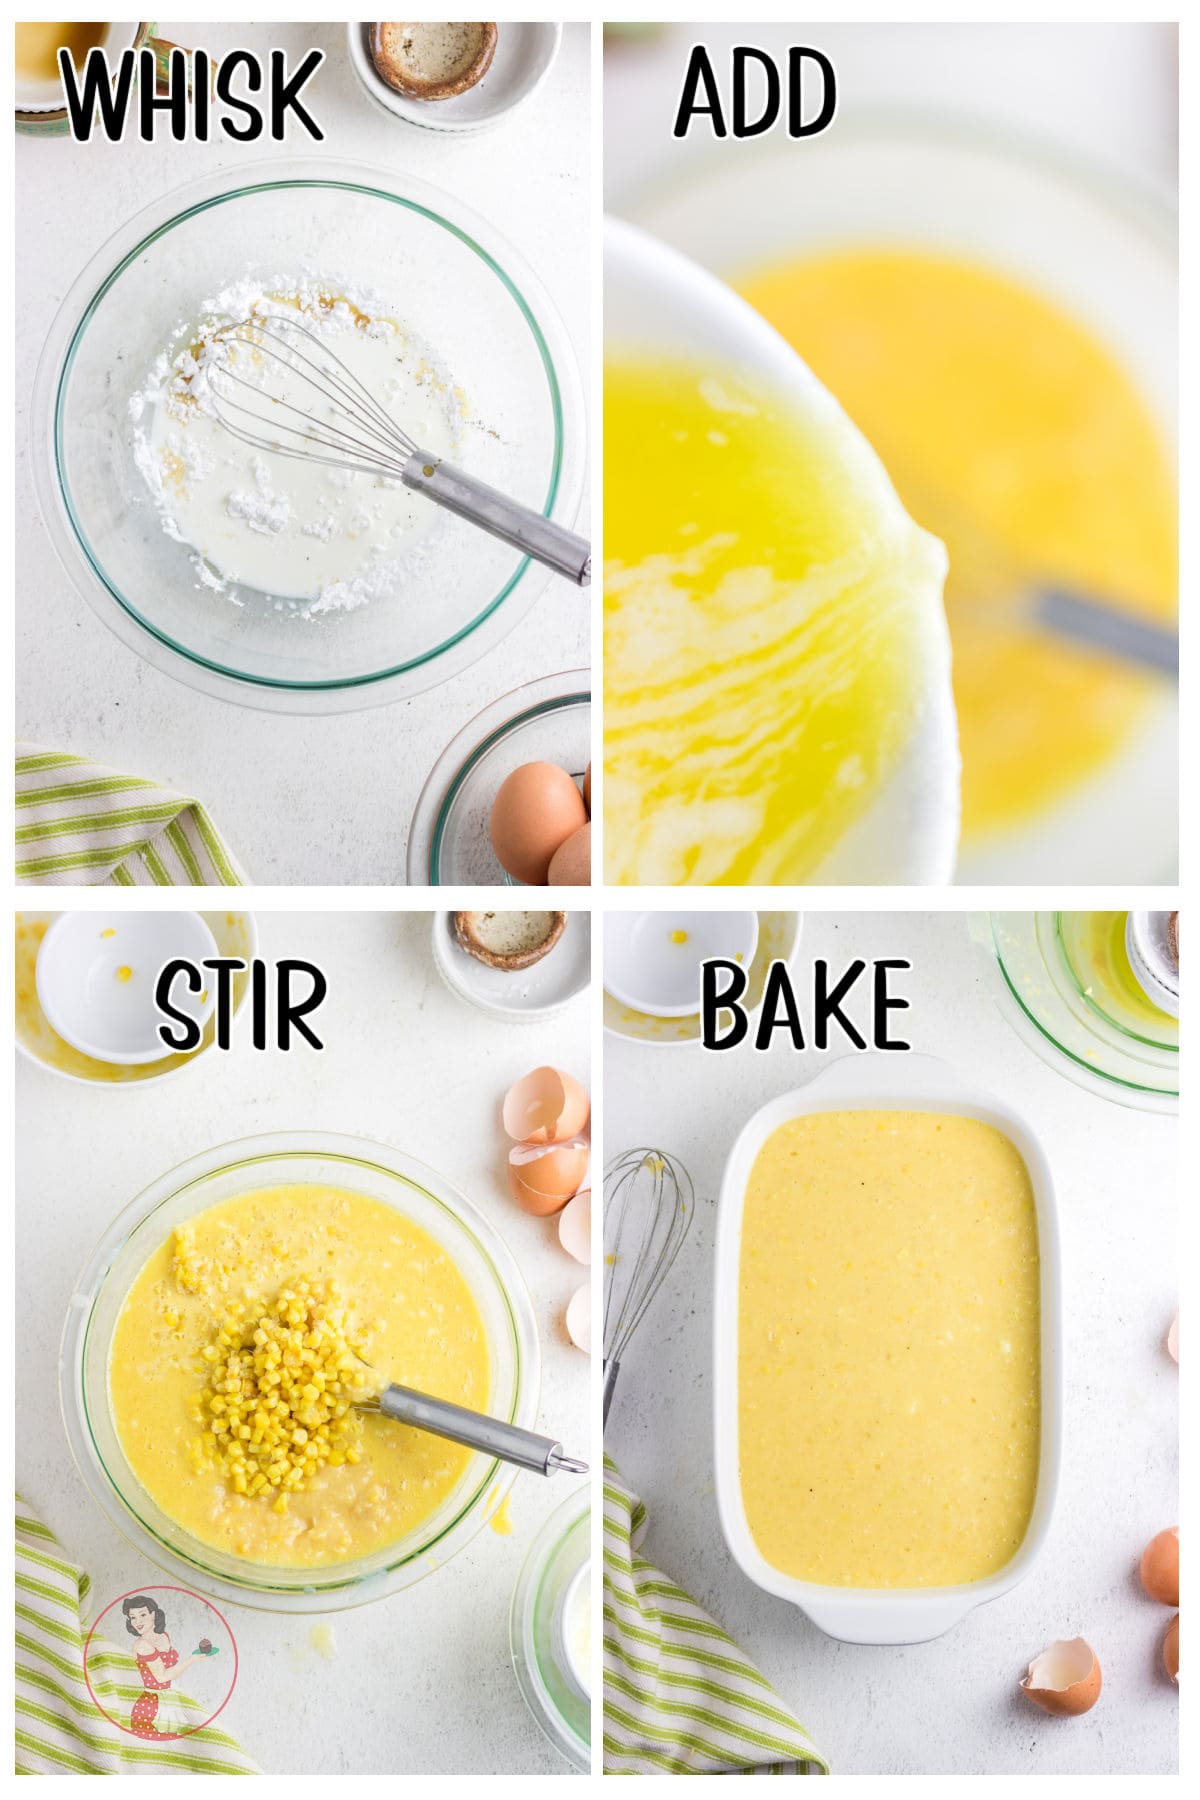 Step by step images showing hot ot make this recipe.